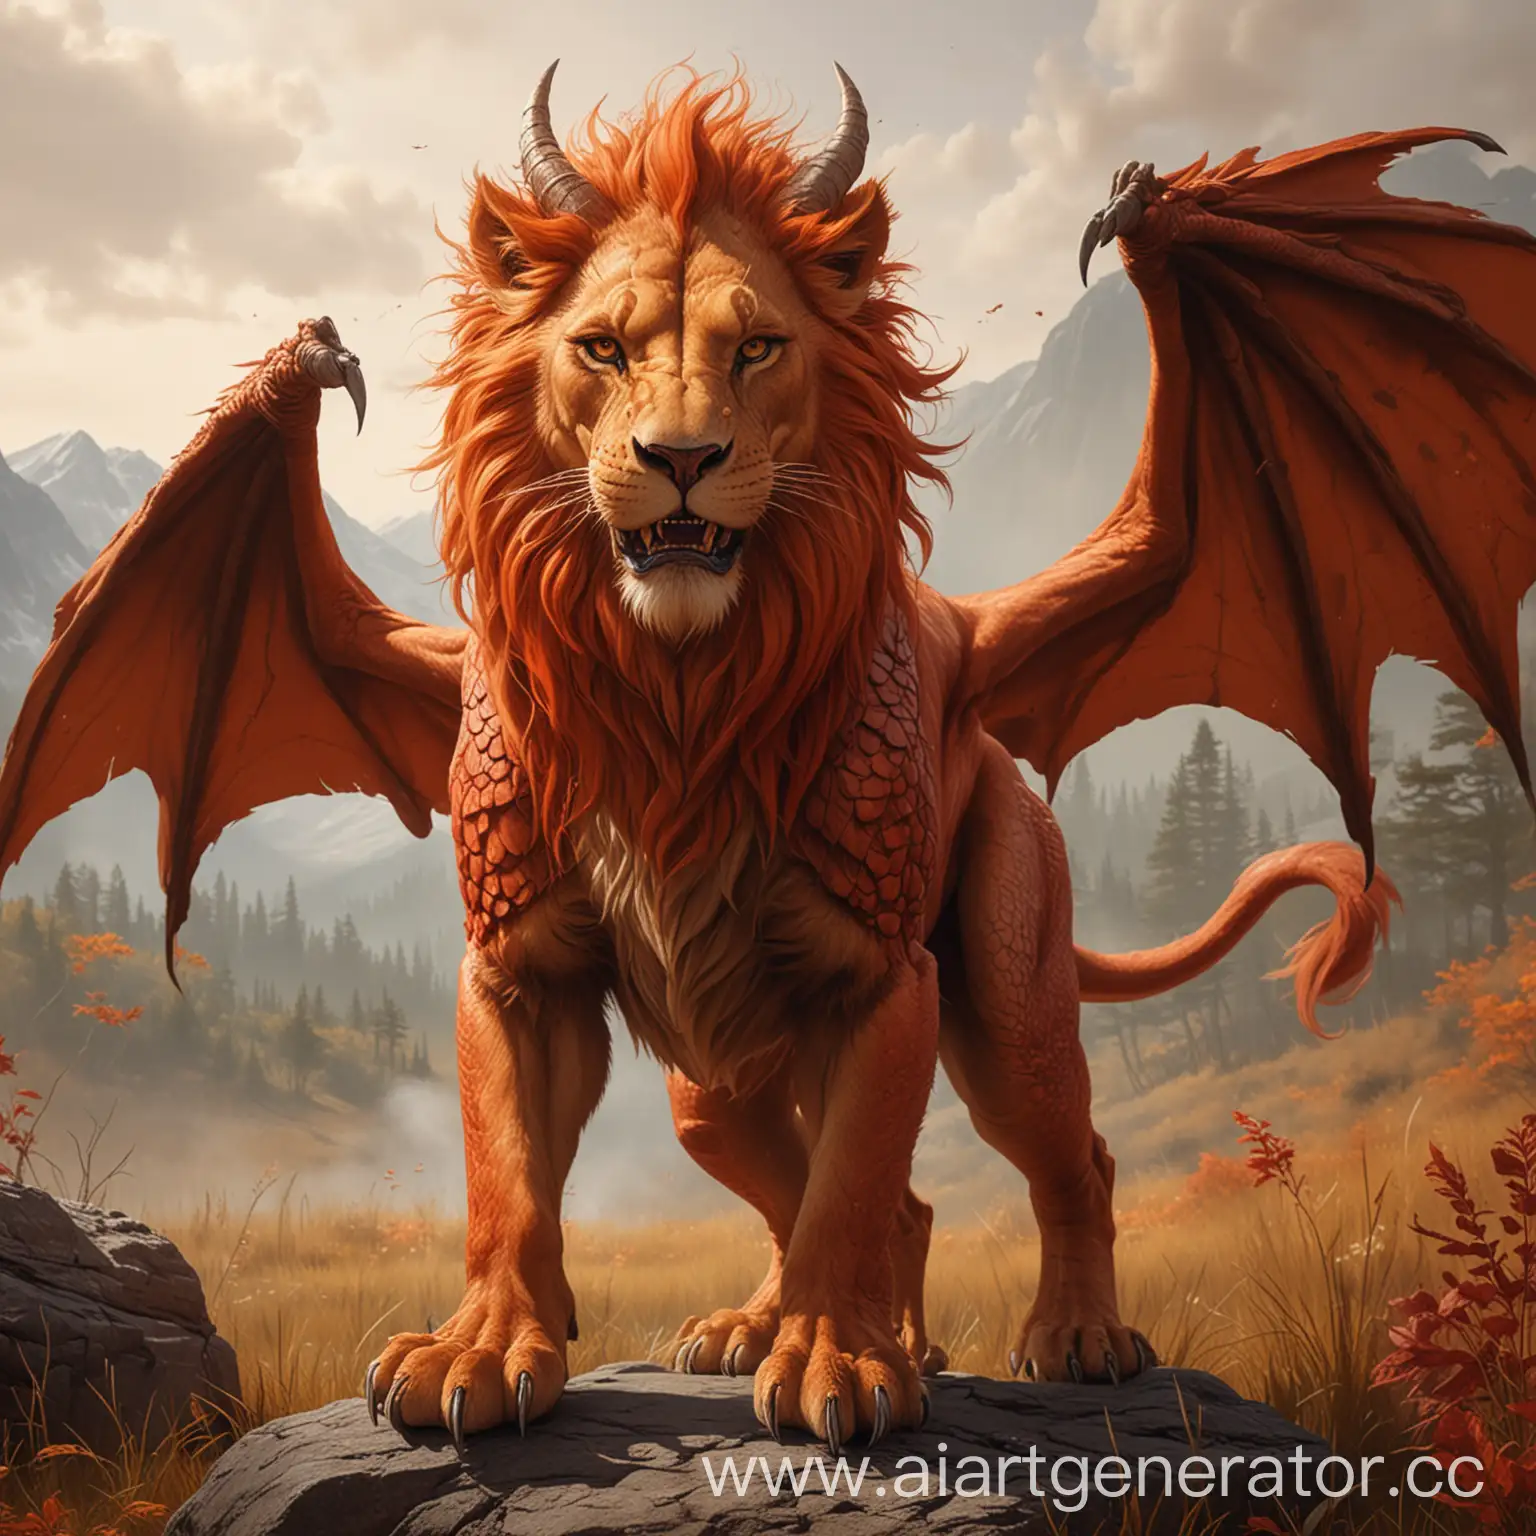 Ginger-Lion-Creature-Fiery-Mane-Dragonlike-Features-Human-Face-with-Three-Rows-of-Teeth